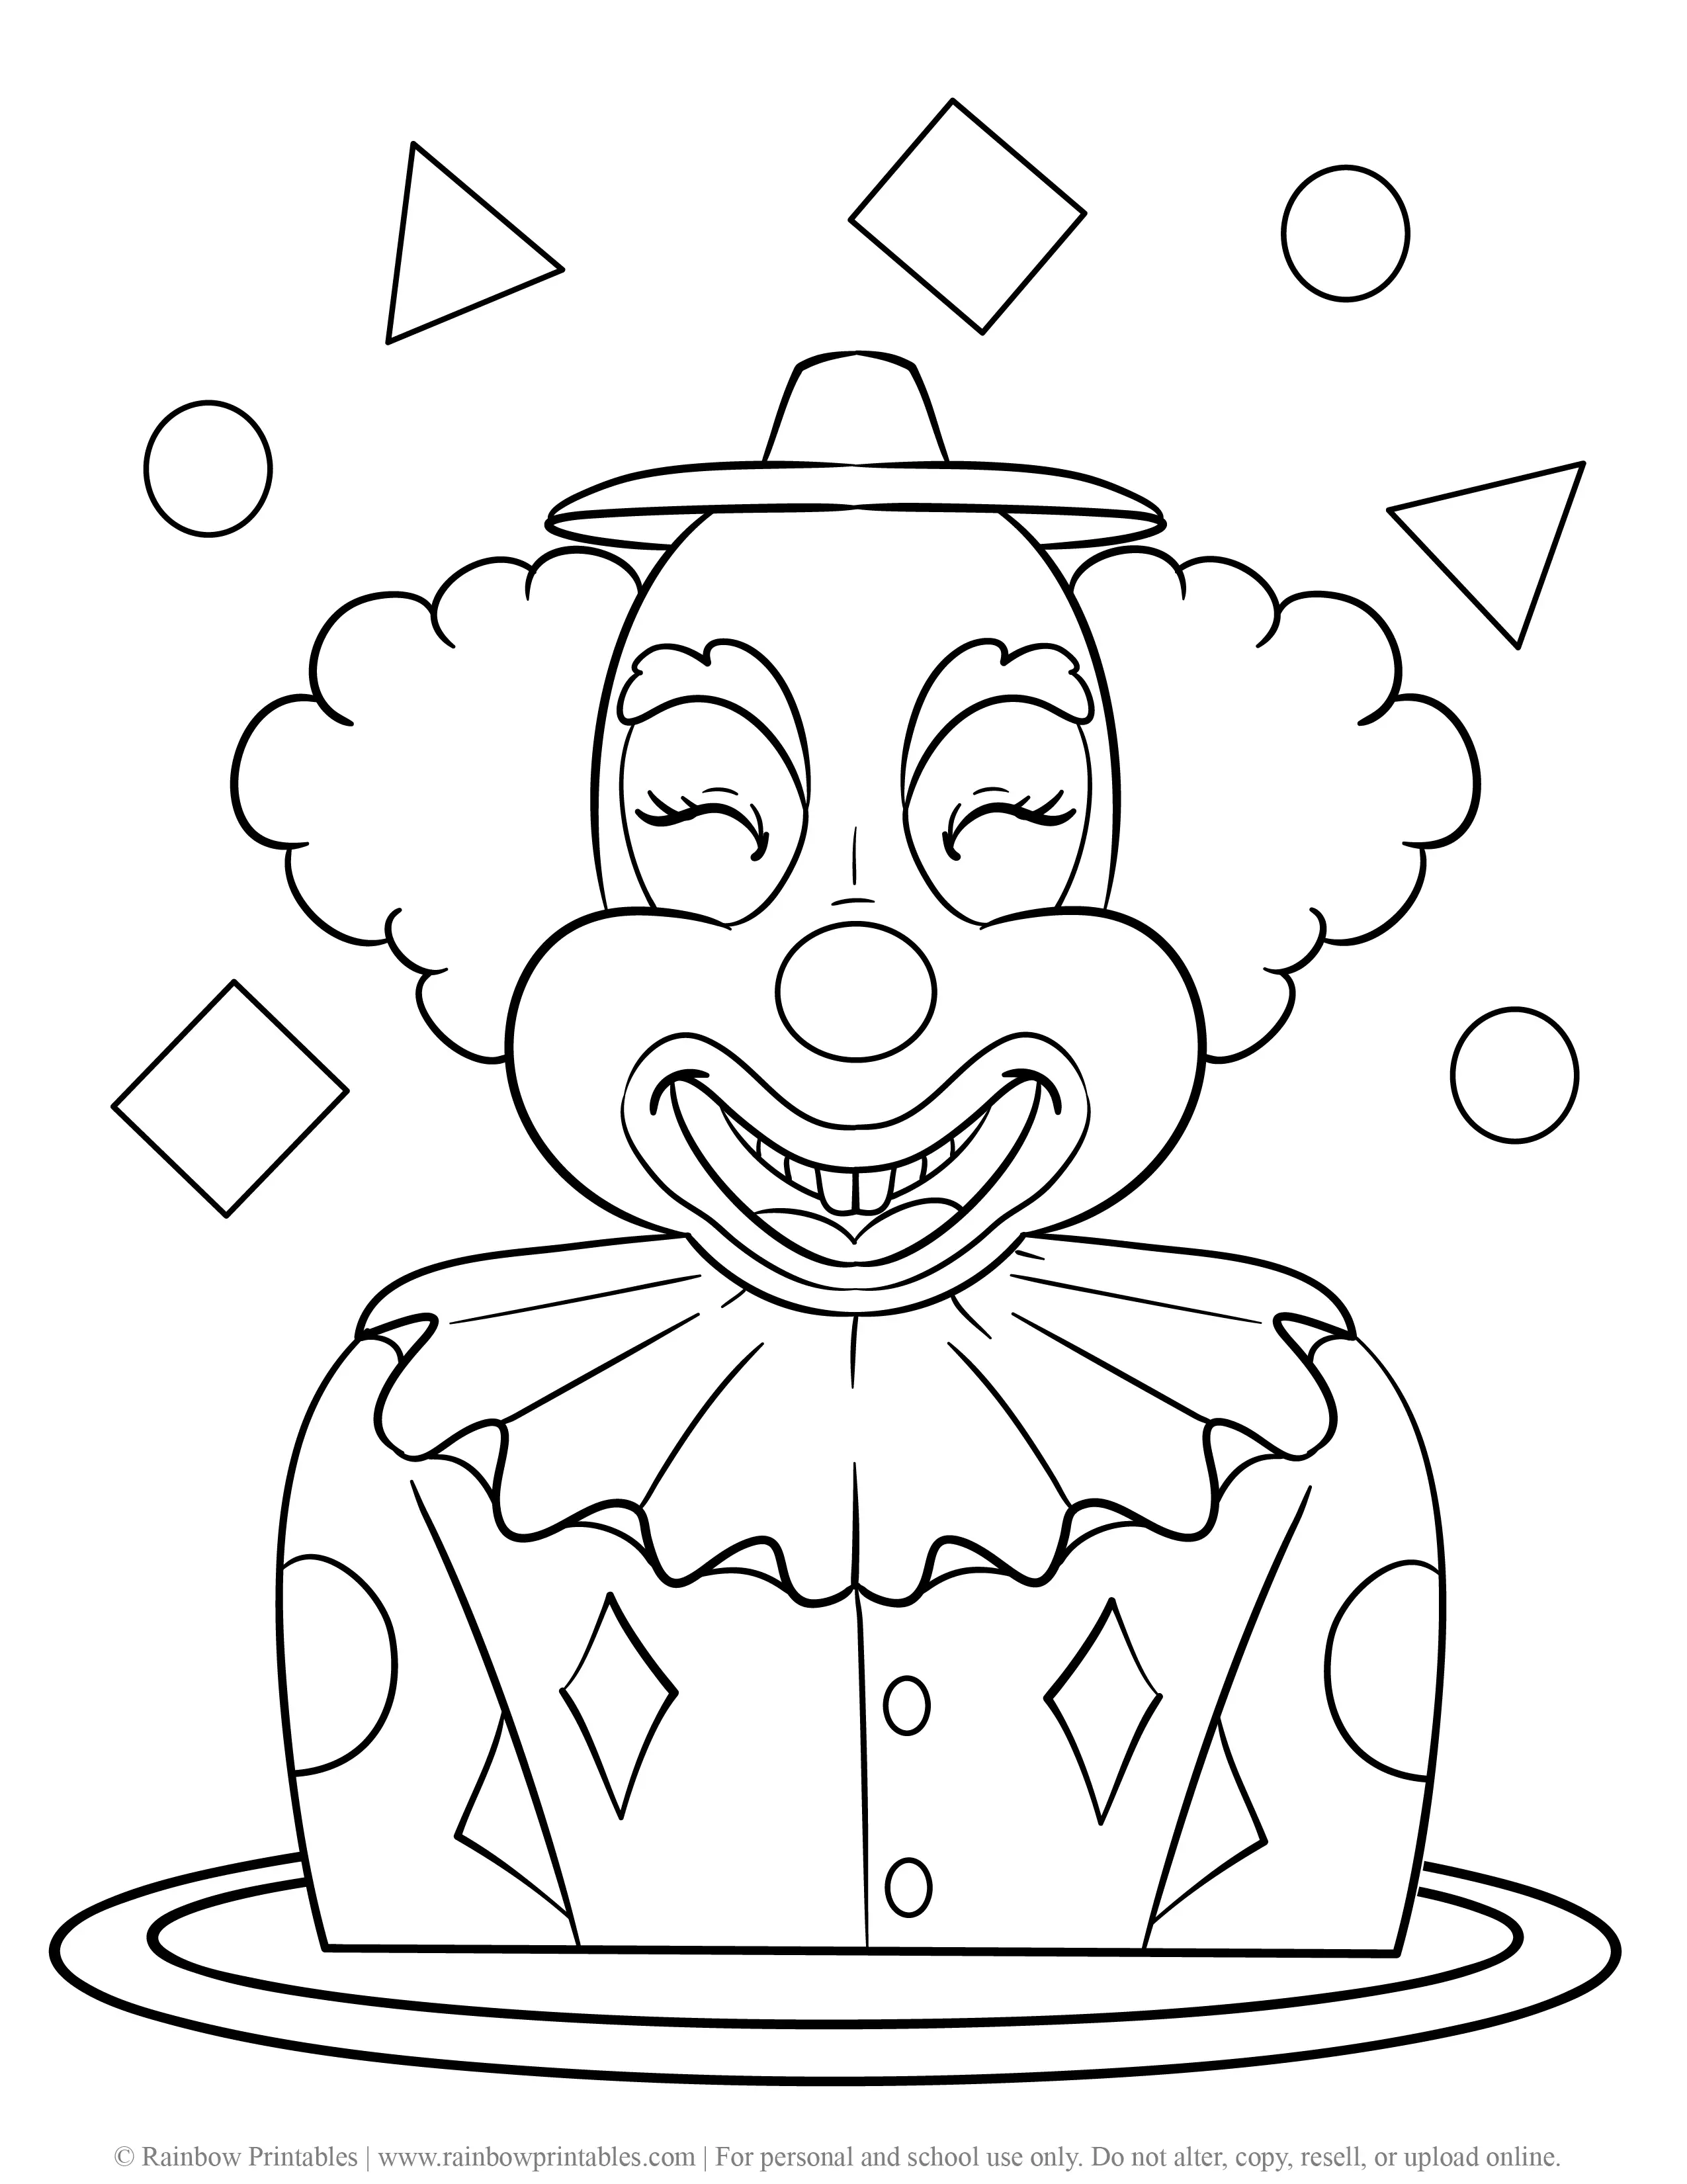 Clown Coloring Pages Rainbow Printables